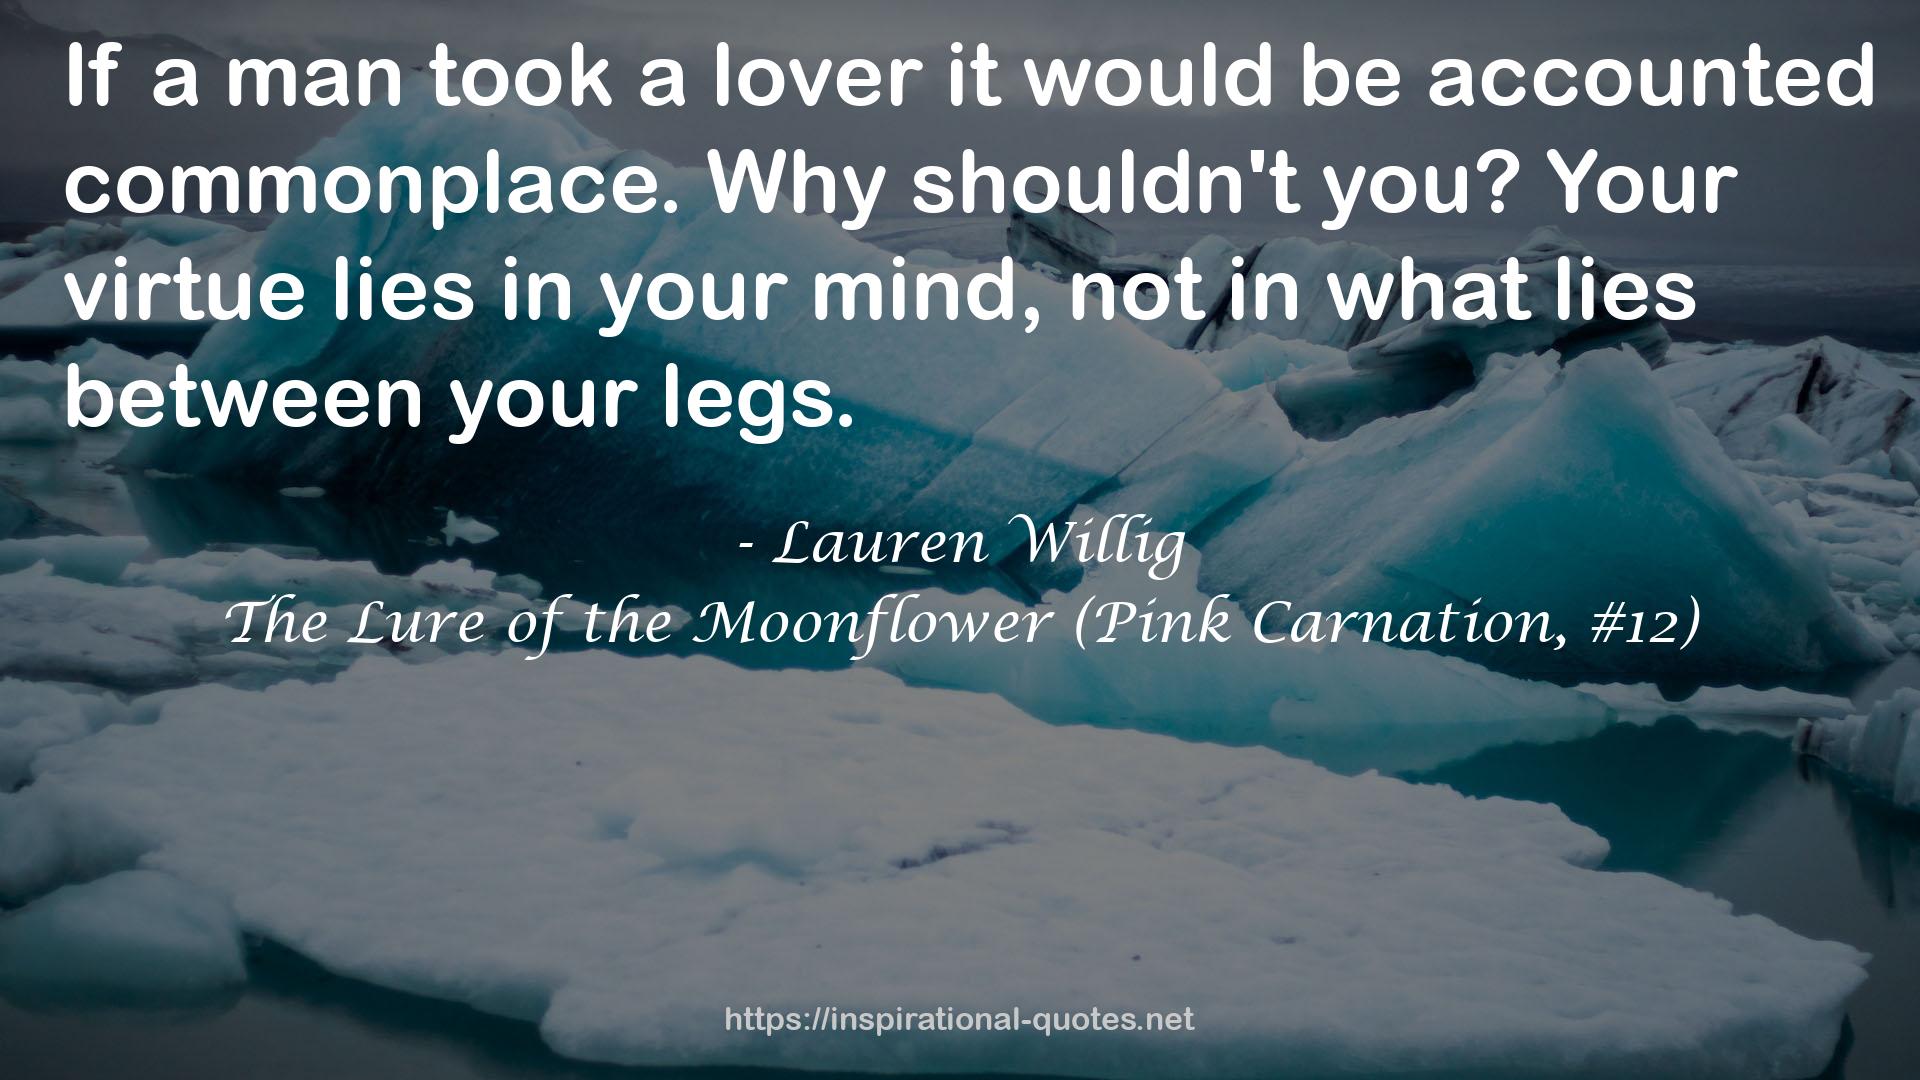 The Lure of the Moonflower (Pink Carnation, #12) QUOTES